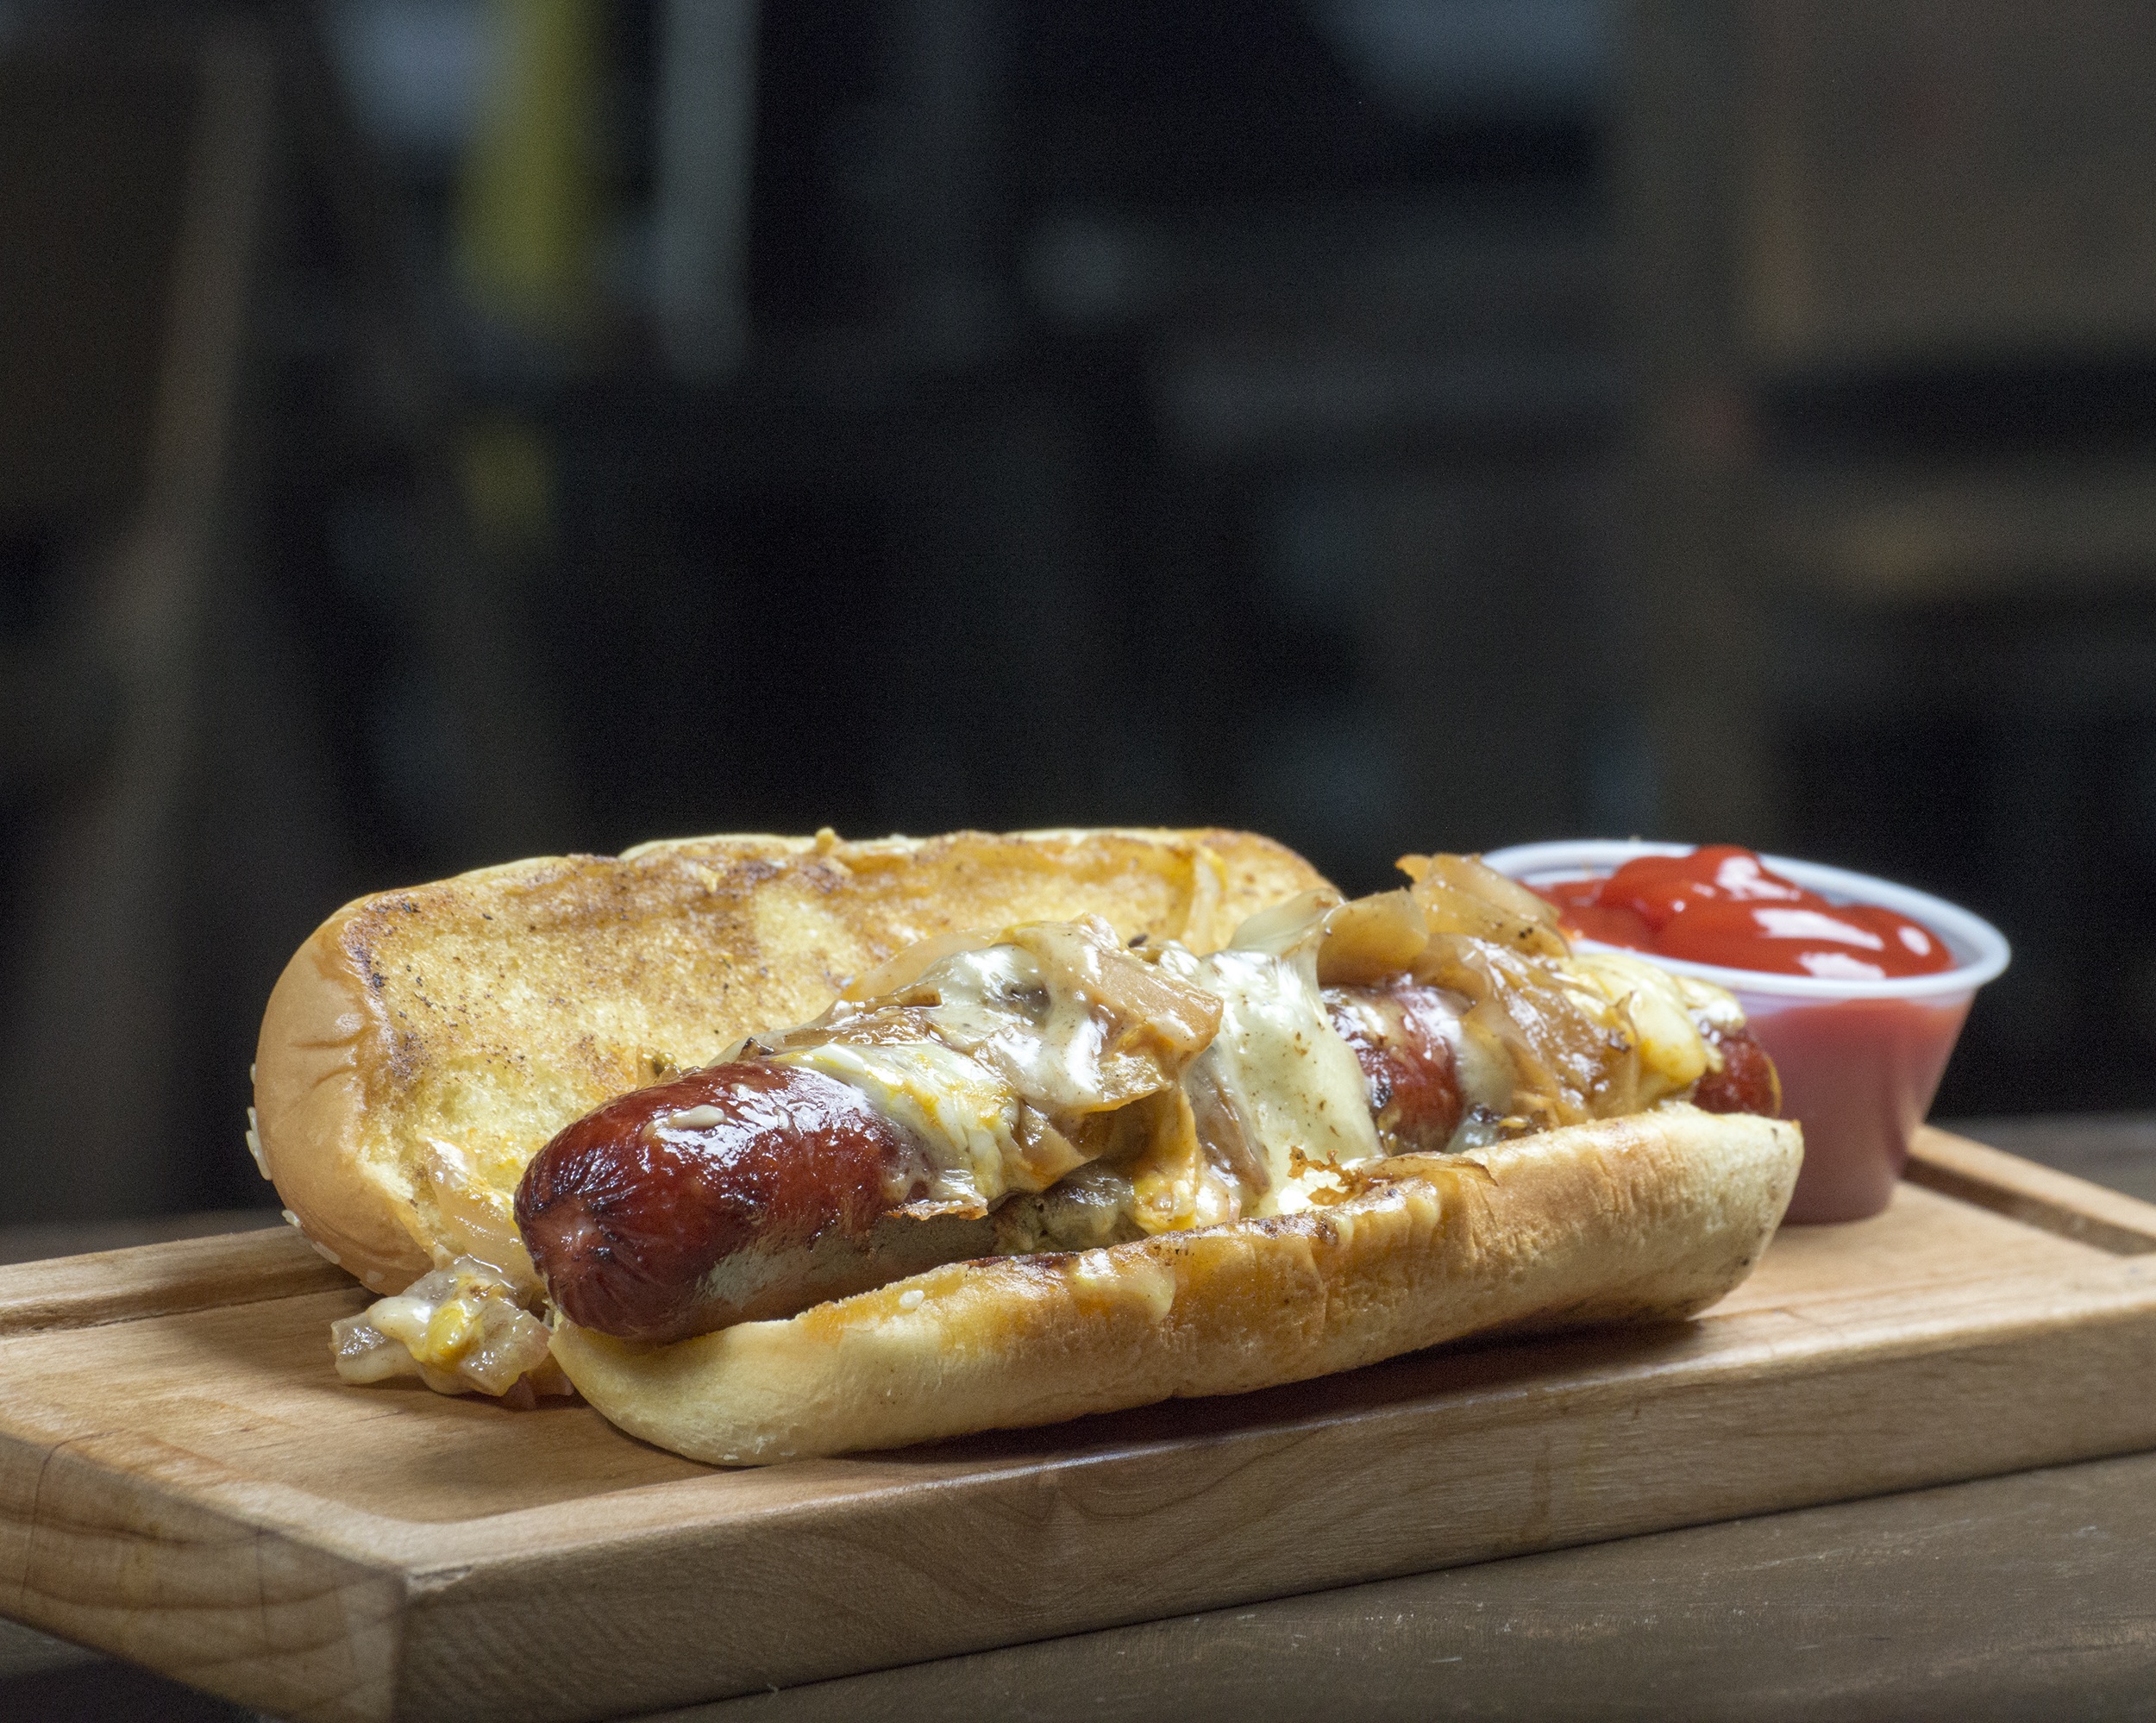 Hot Dog with Cheese and Sauce by Fernando Villalobos